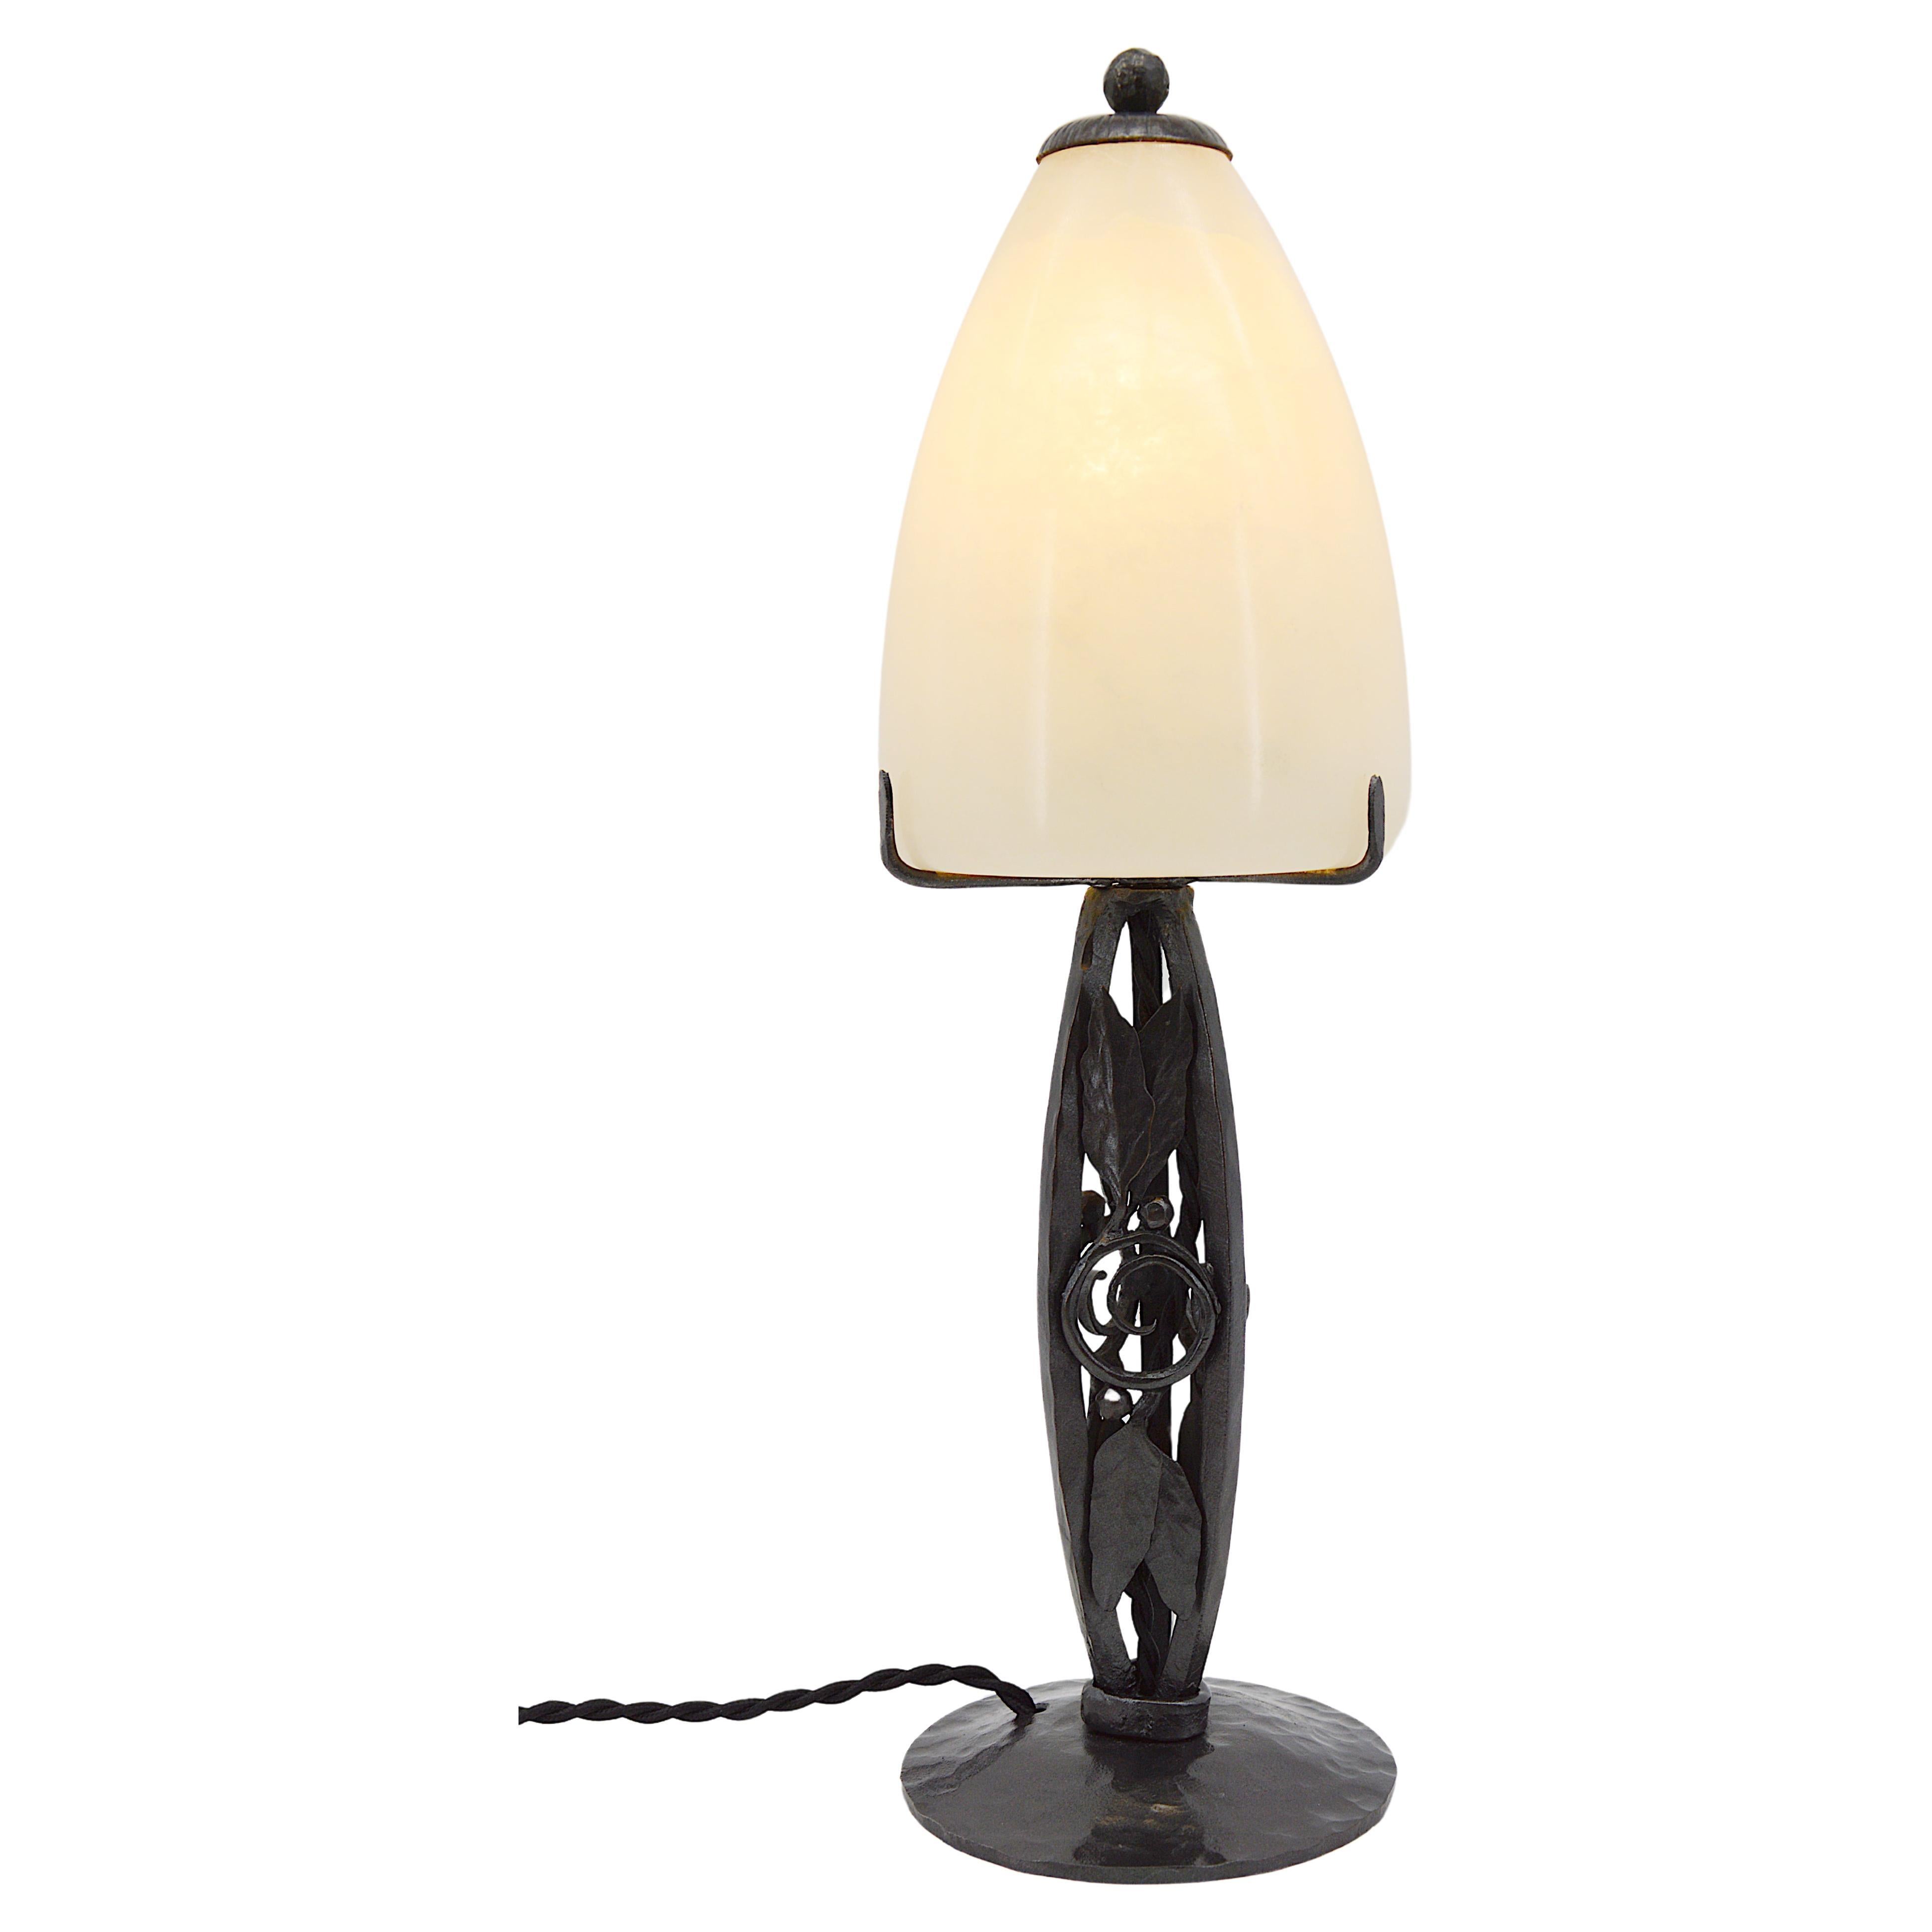 French Art Deco Alabaster Table Lamp, 1920s For Sale